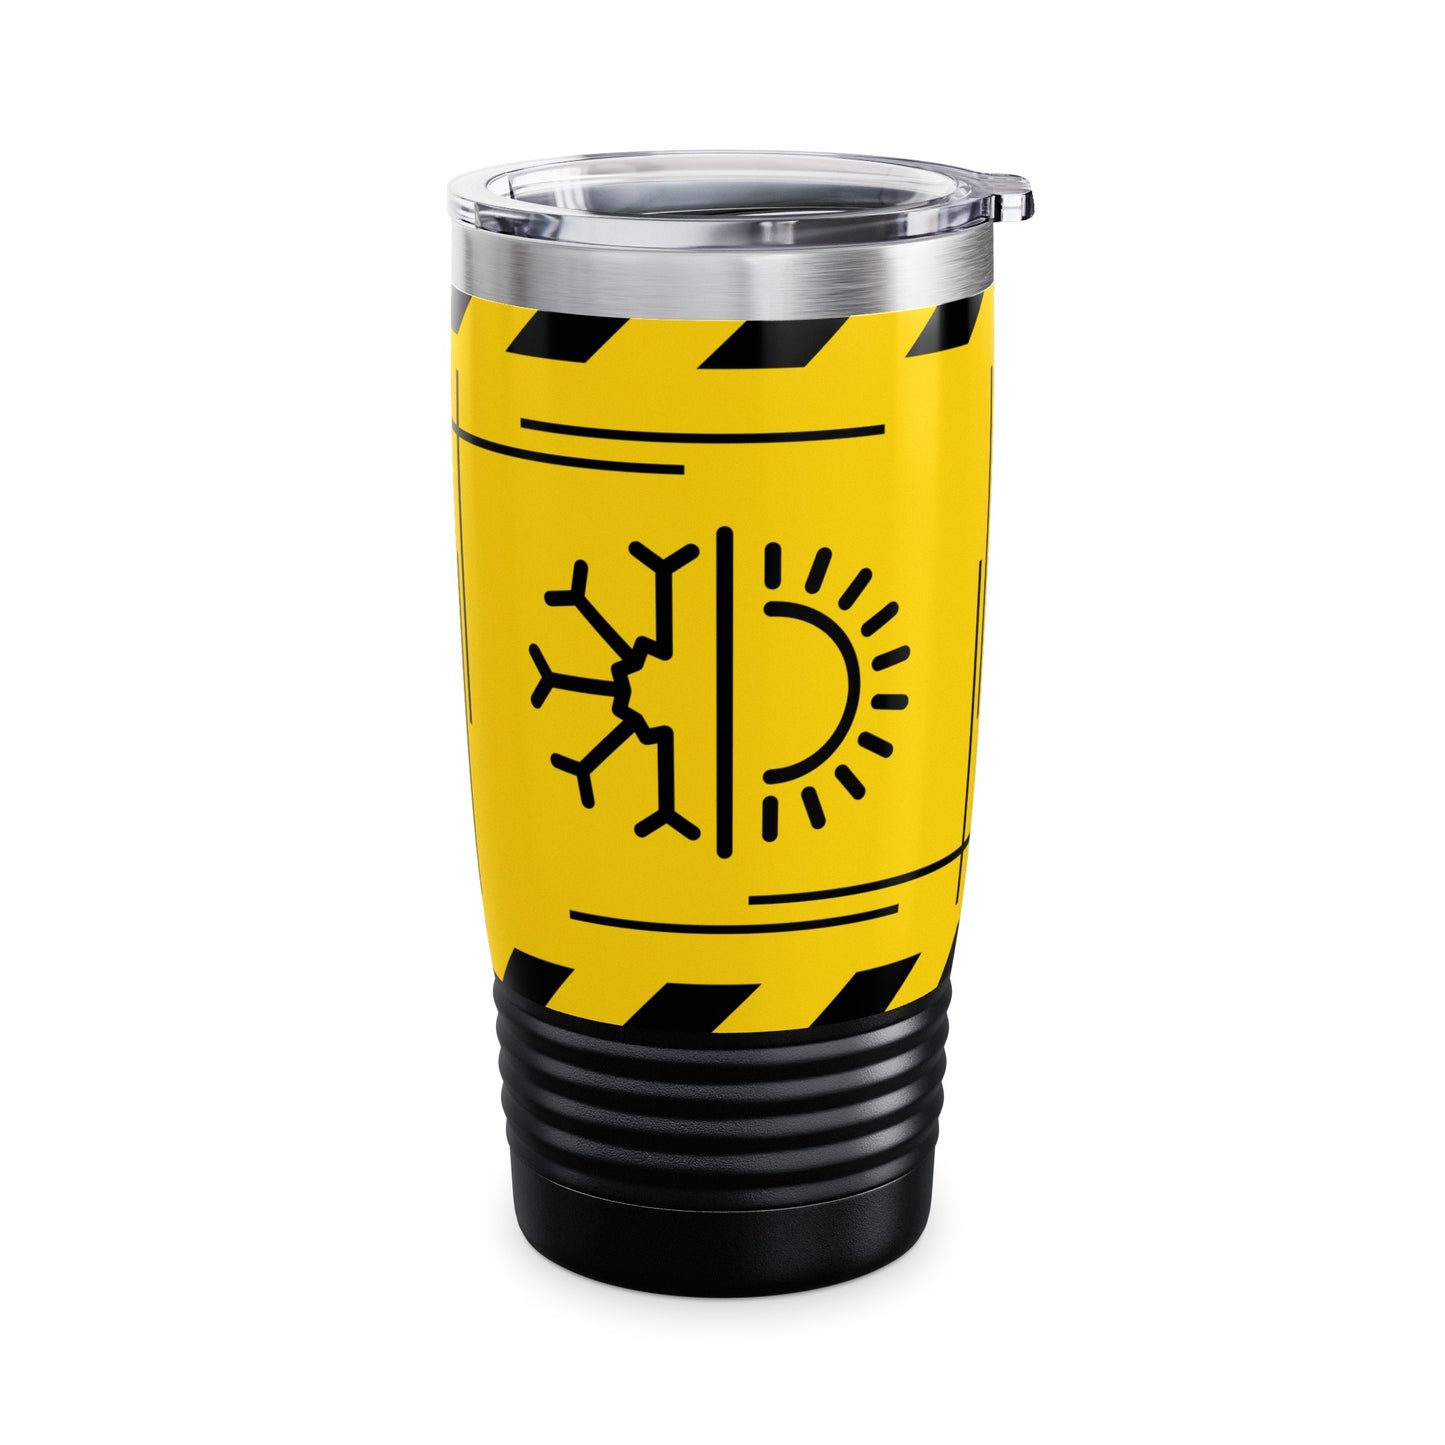 Relax, I'm An HVAC TECH, And I Know Things - Ringneck Tumbler, 20oz